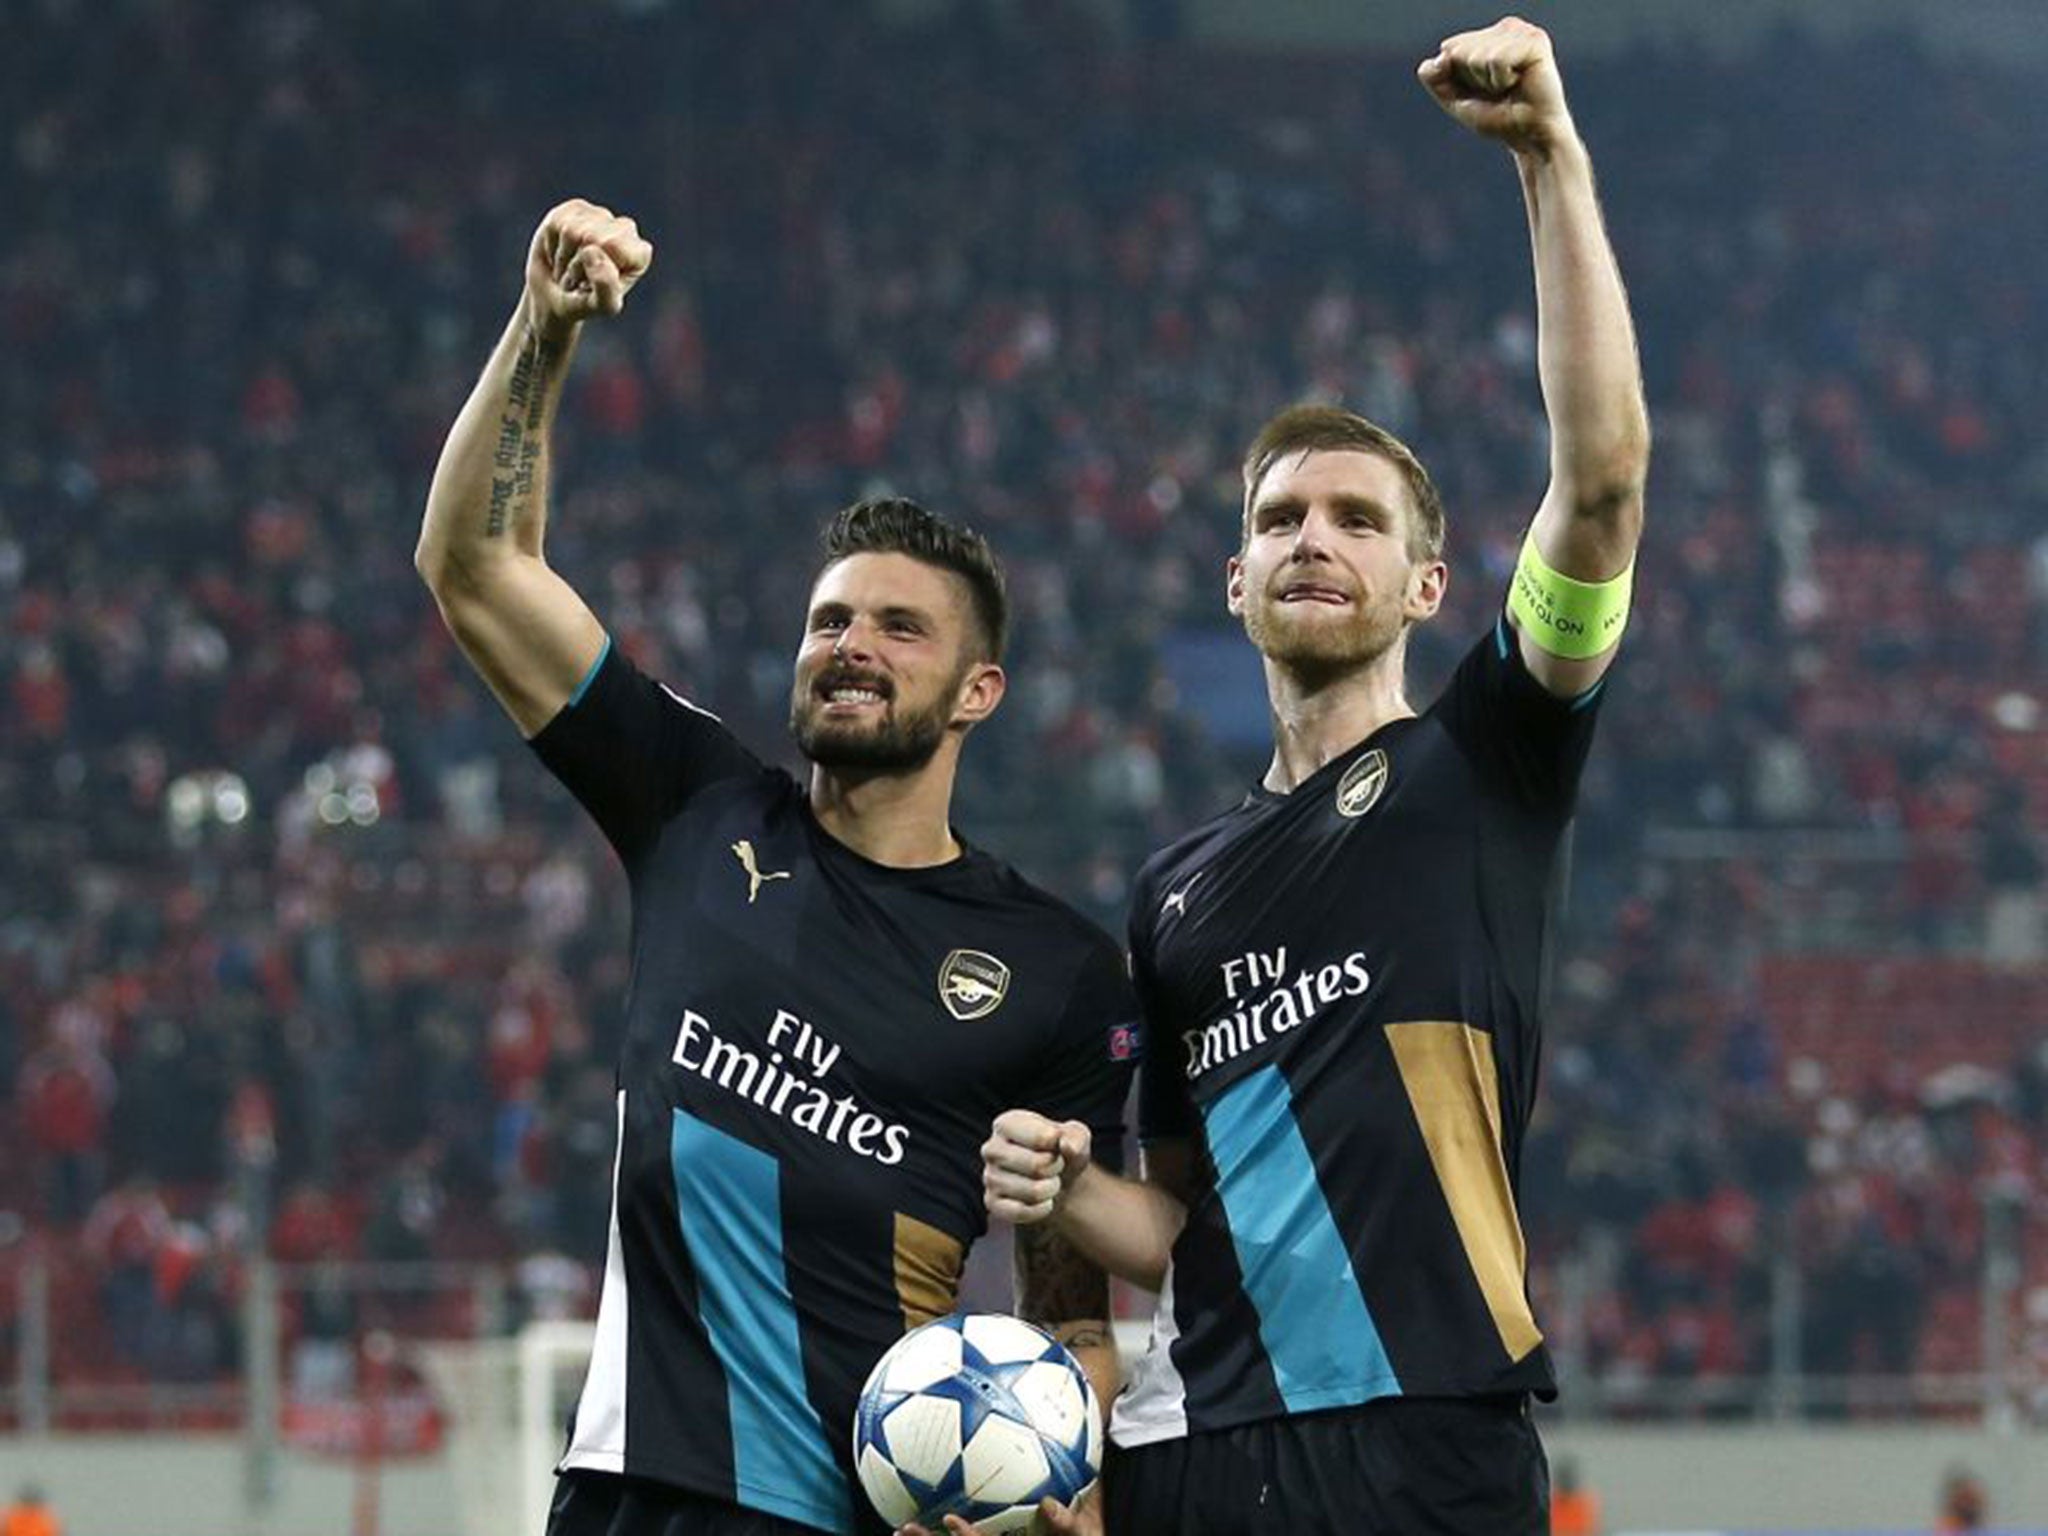 Arsenal’s Olivier Giroud, left, celebrates with Per Mertesacker and the match ball after scoring a hat-trick against Olympiakos